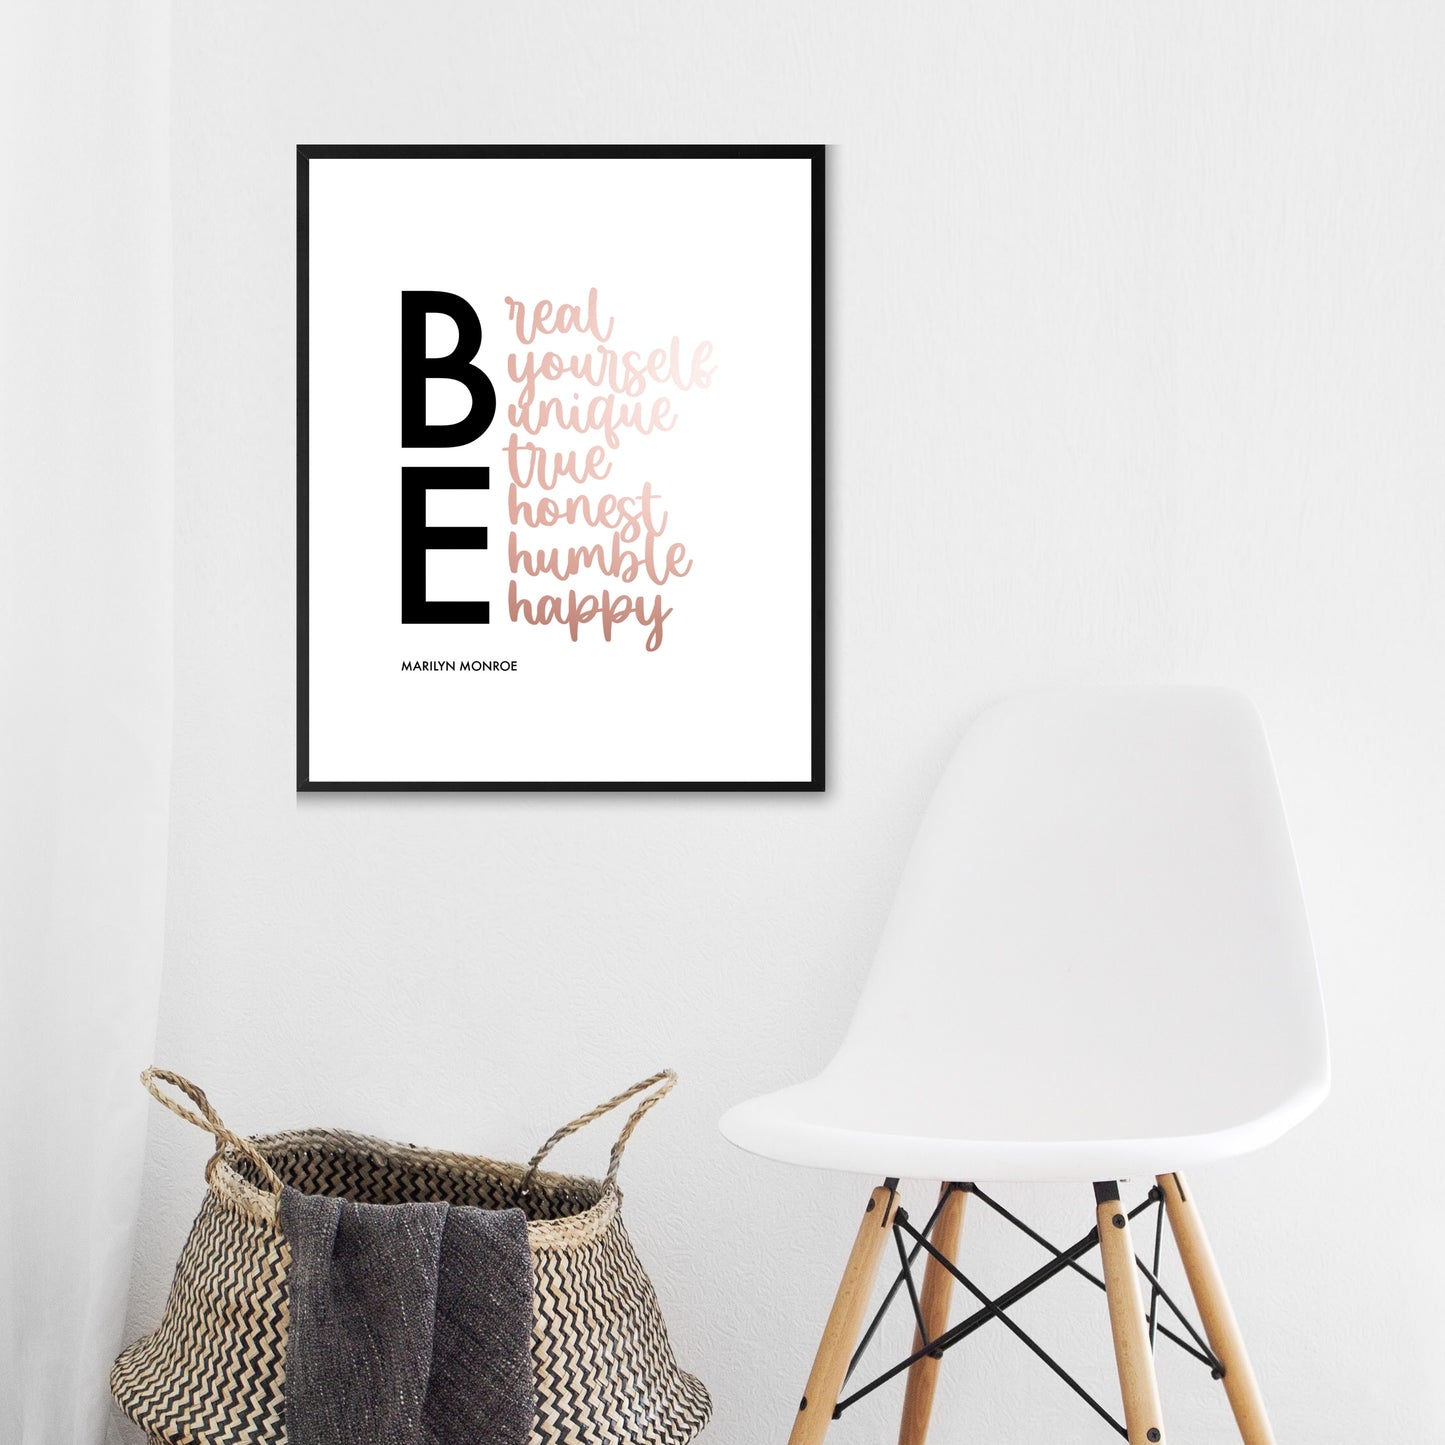 "Be..." Famous Quote by Marilyn Monroe In Rose Gold, Printable Art